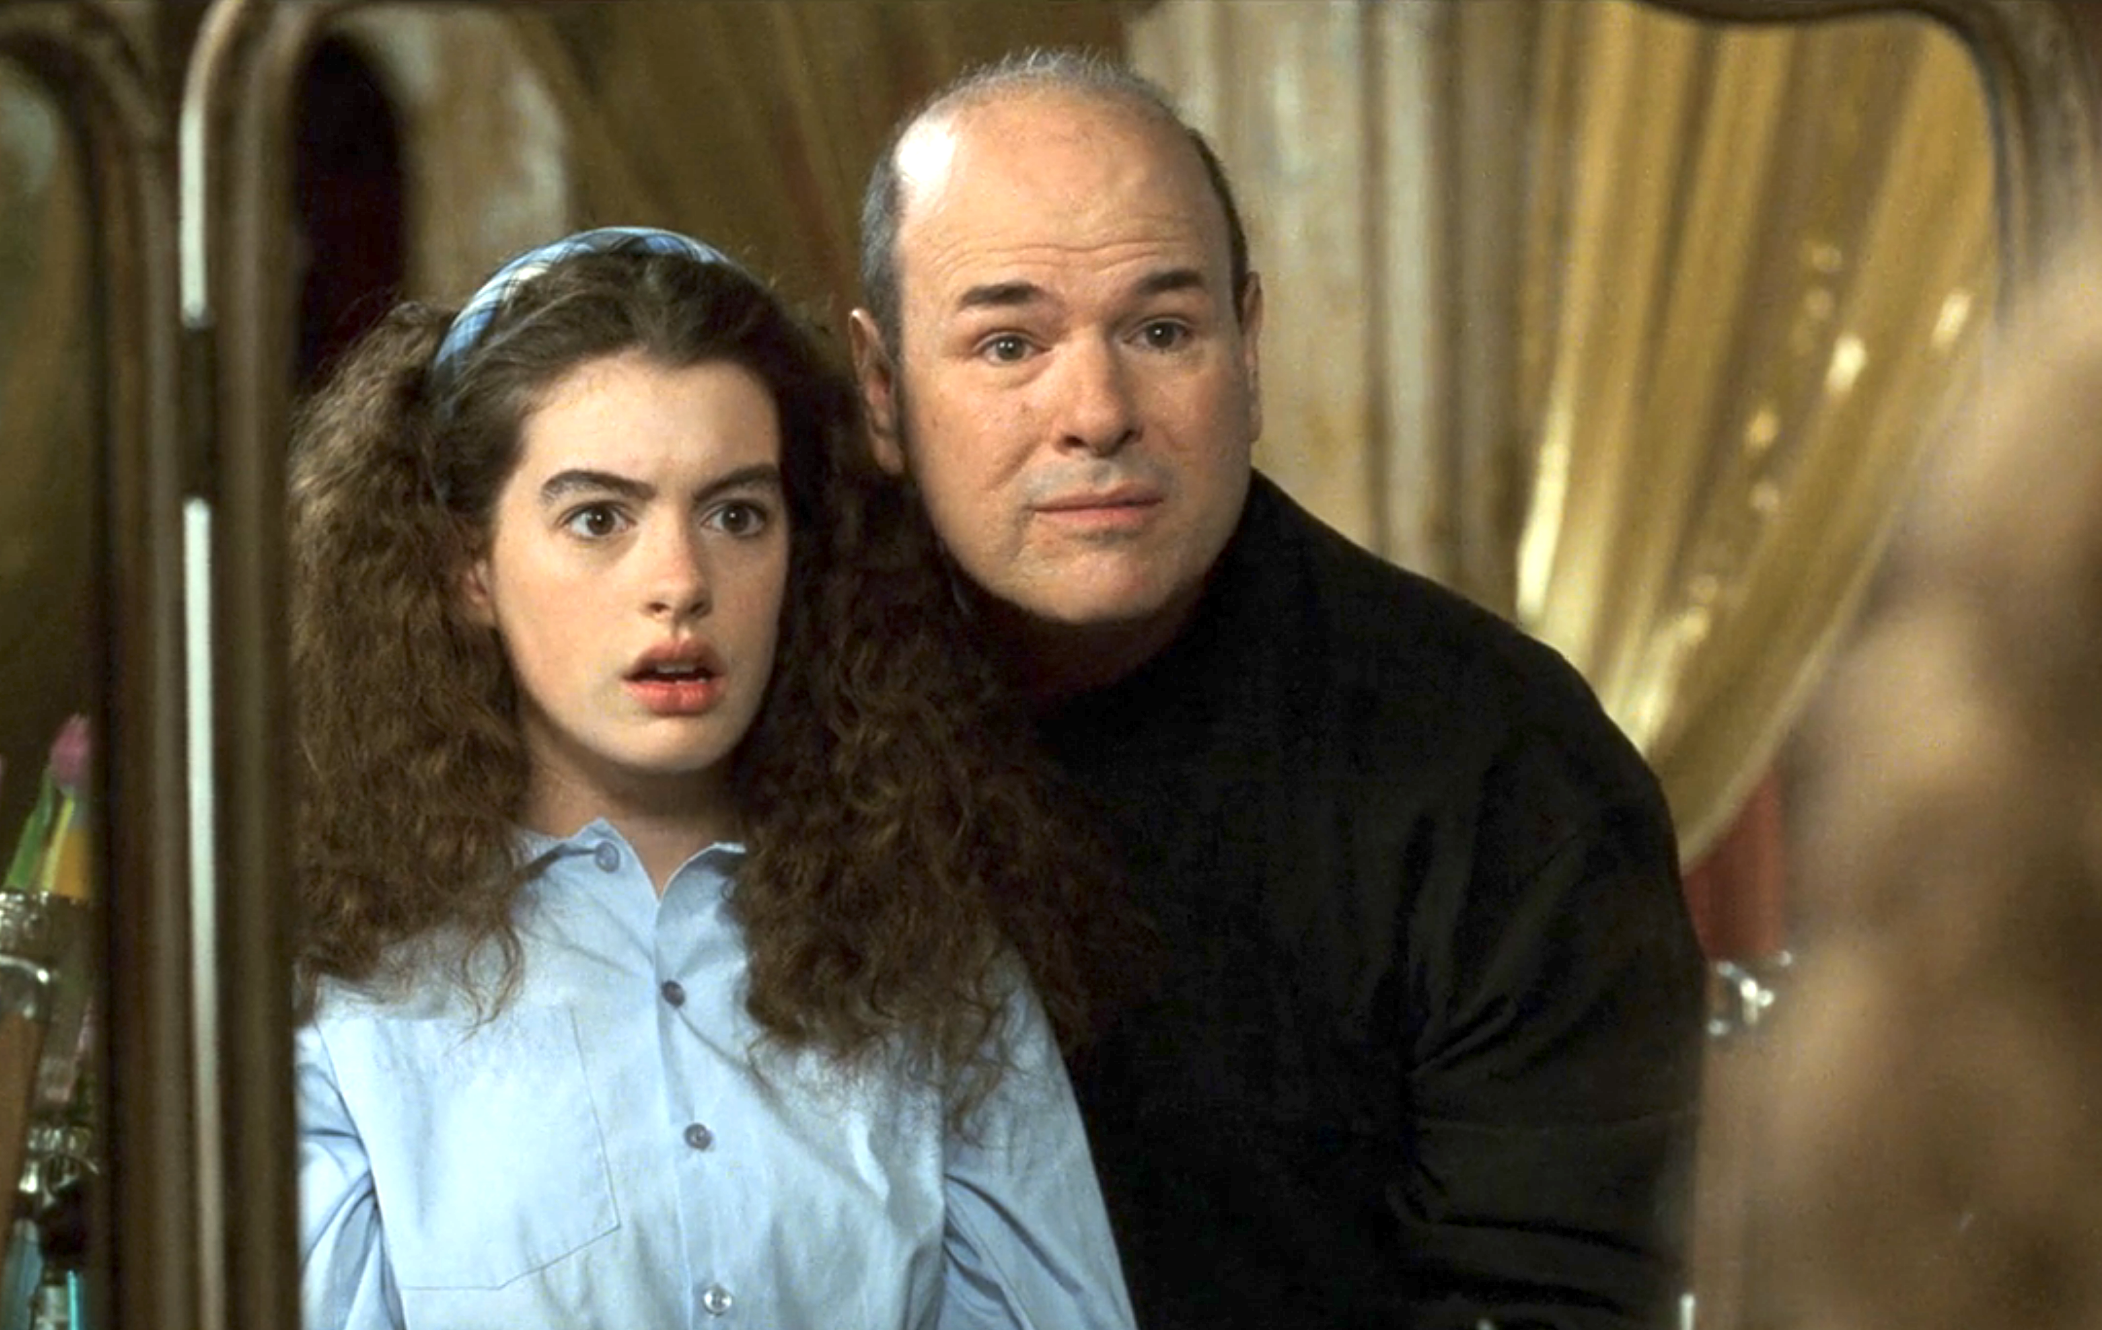 Larry Miller standing by Anne Hathaway and looking in a mirror